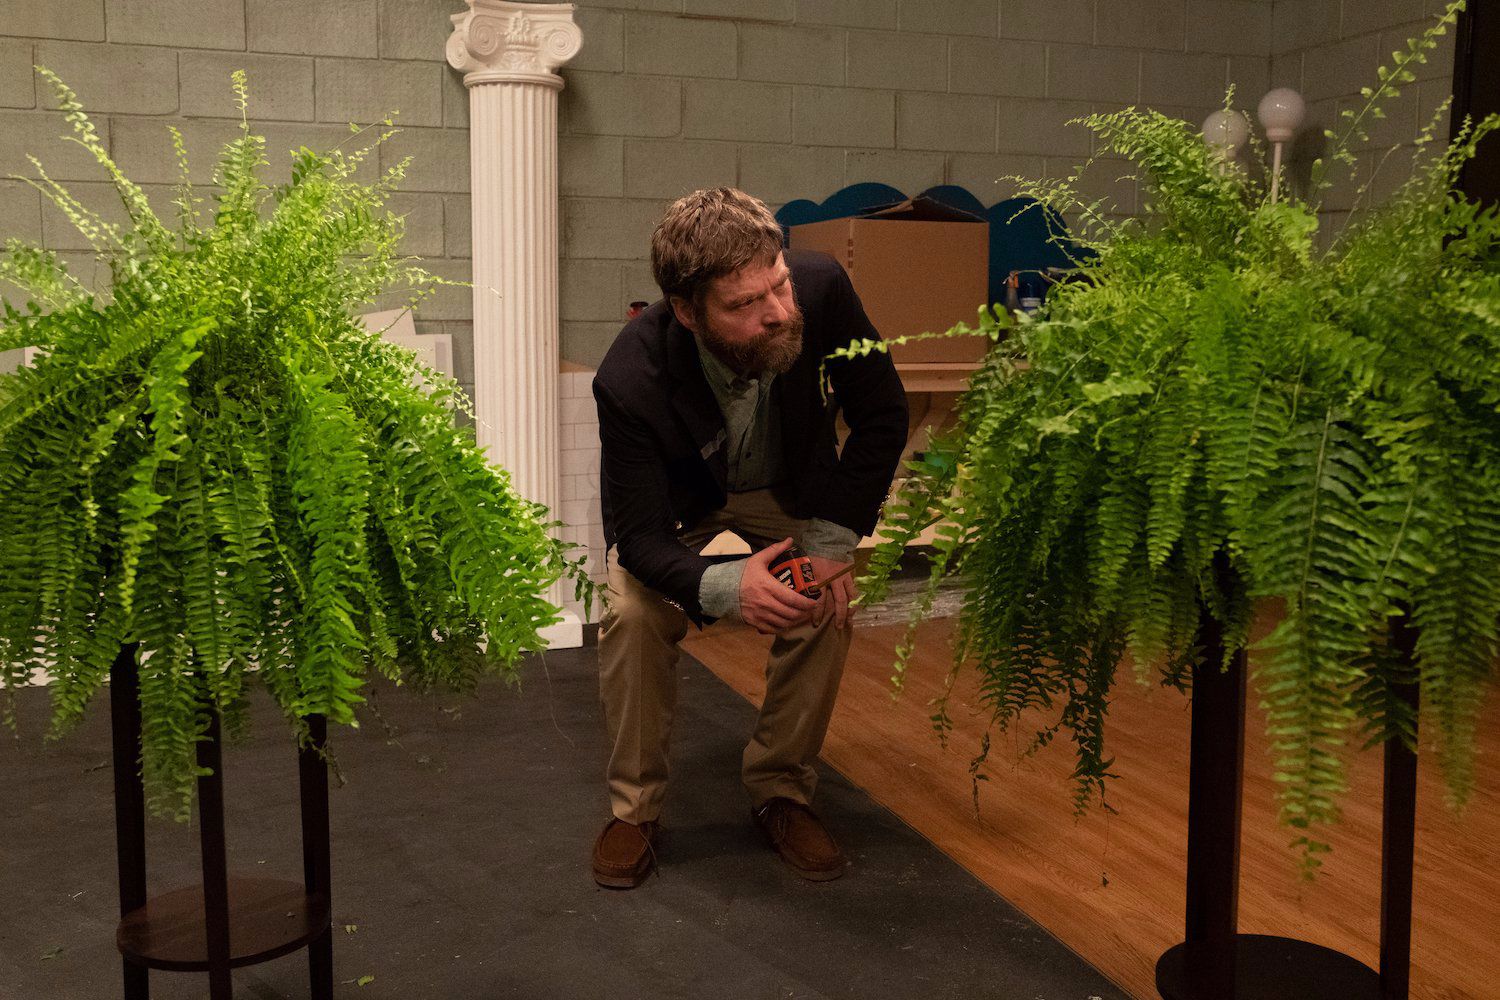 Between Two Ferns: The Movie photo 2